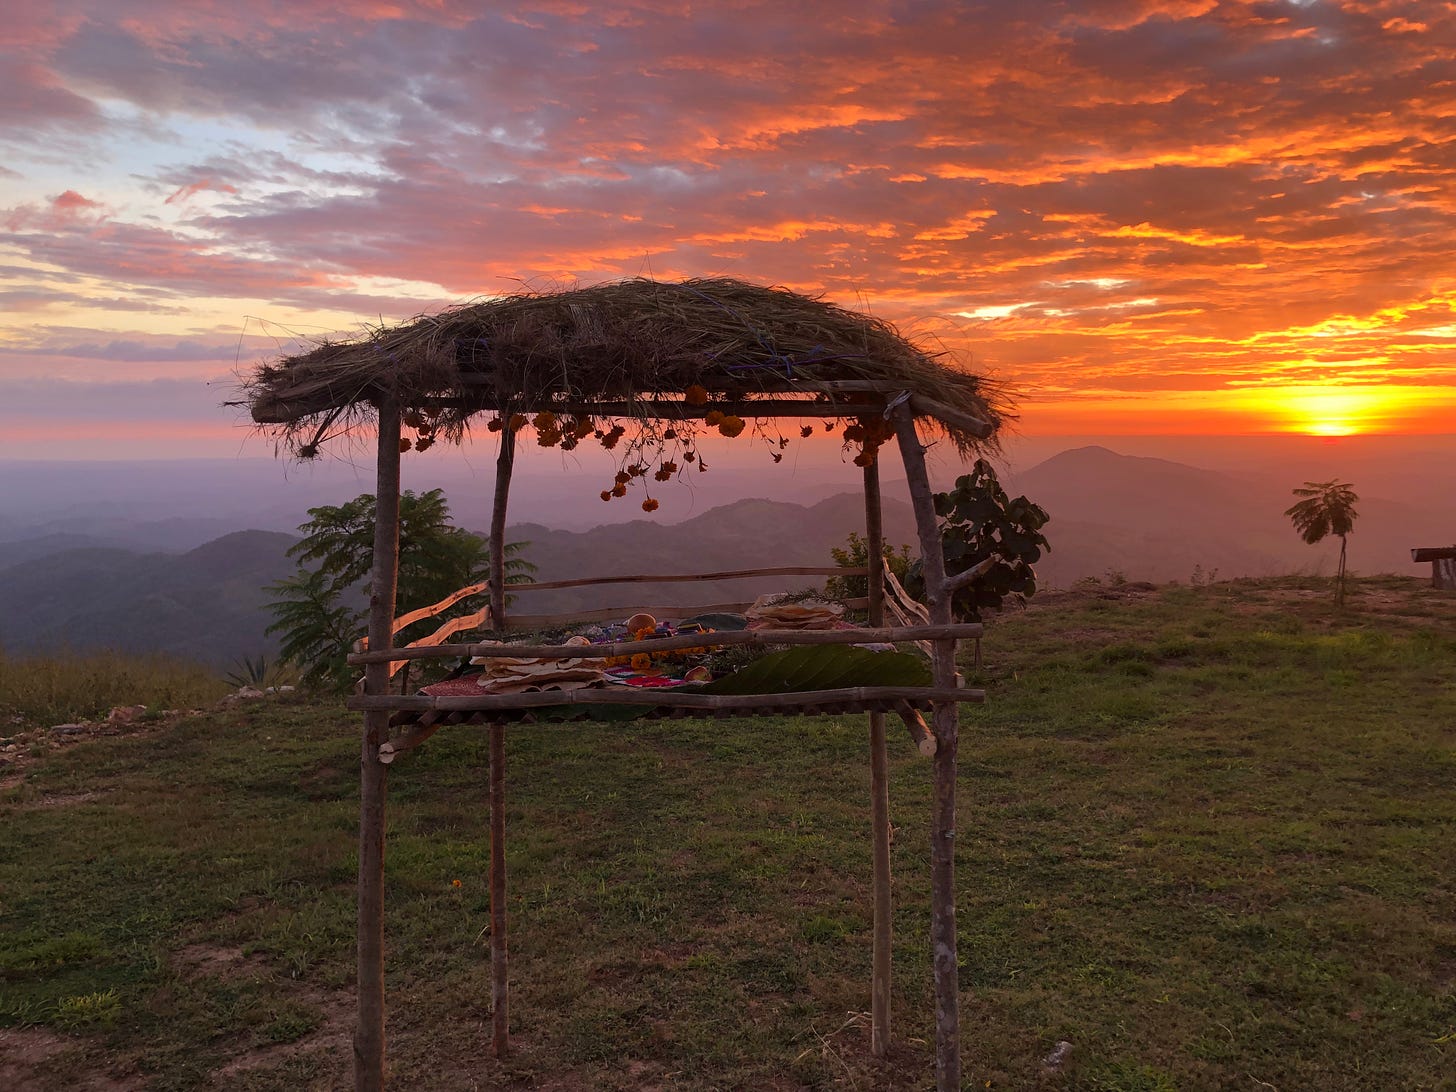 A small structure of reeds with a thatched roof, from which hangs the silhouettes of marigolds. You can just make out the fruit and dishes on the platform beneath. In the background there's a sunset and the outlines of mountains. 